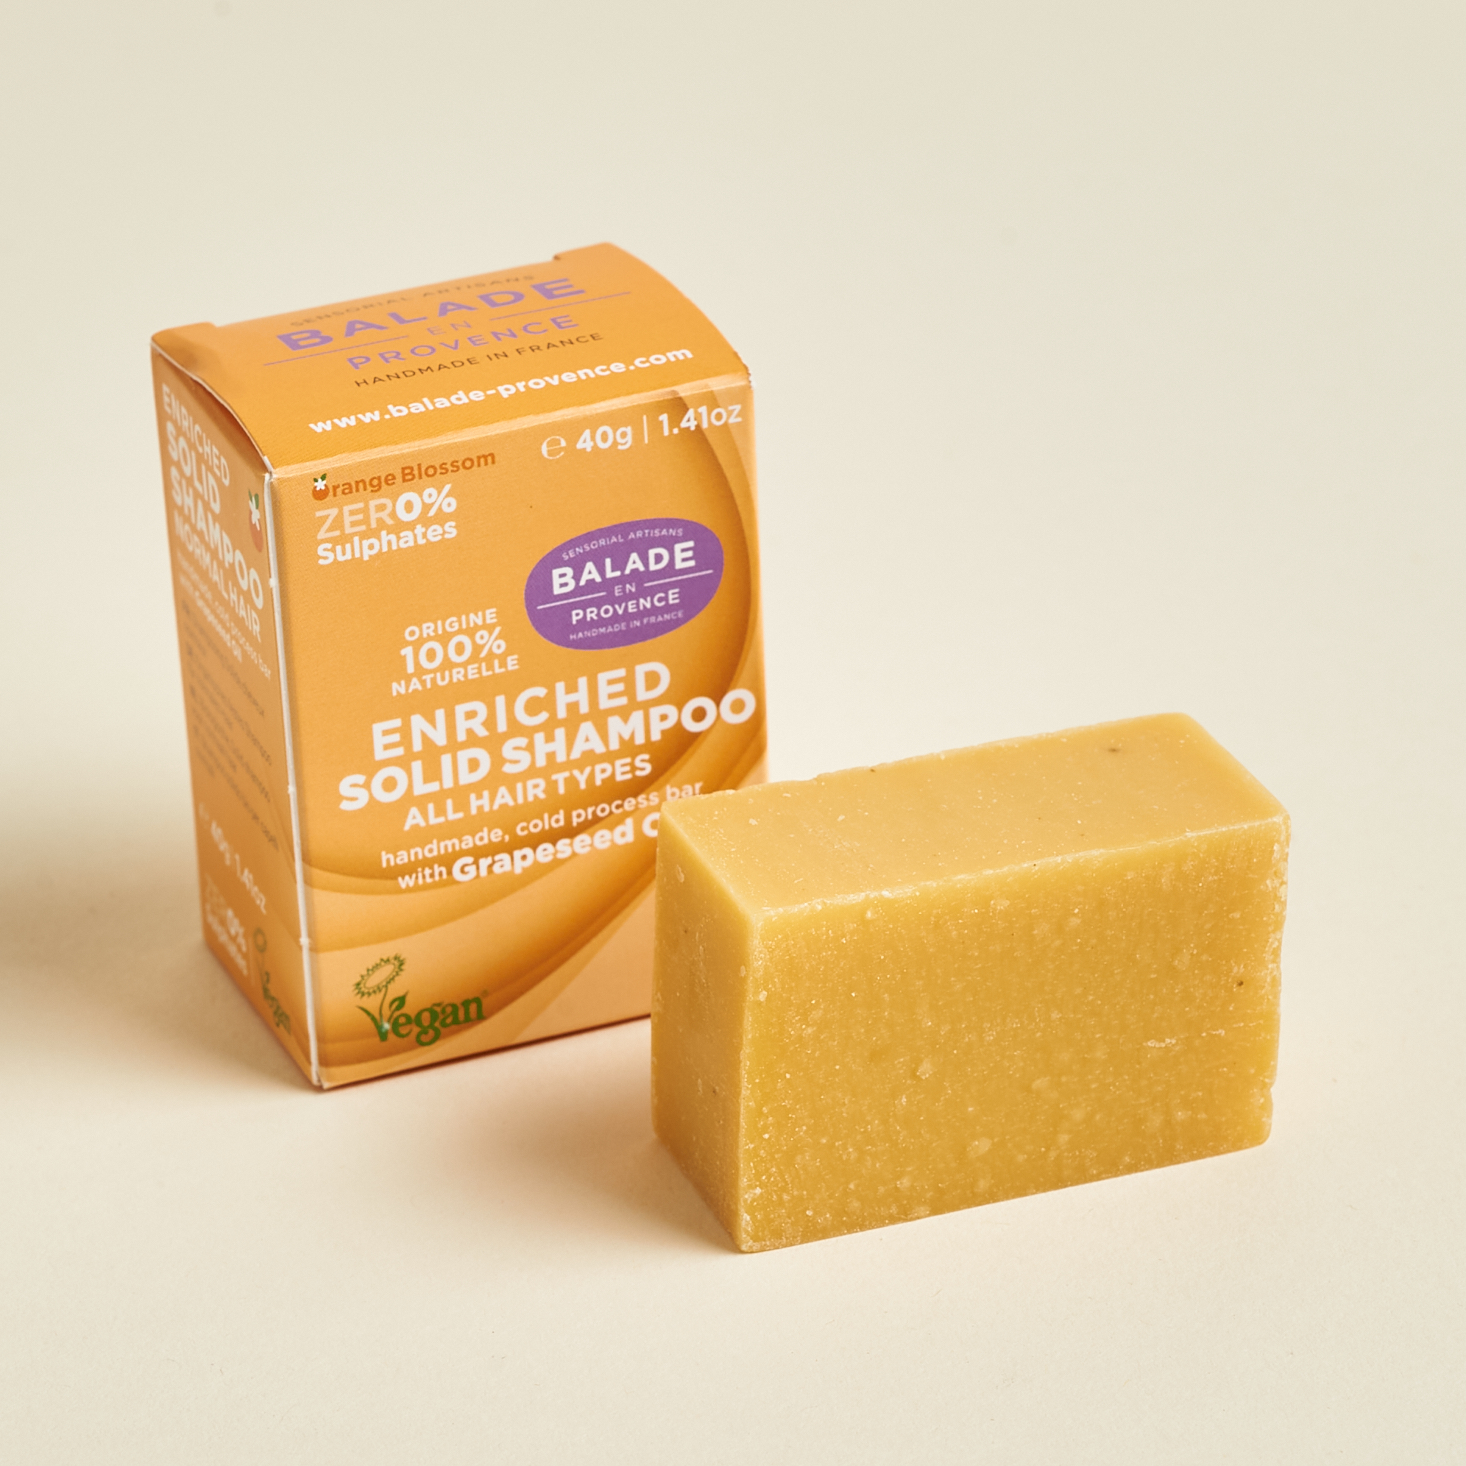 Balade en Provence Enriched Shampoo Bar from Love Goodly